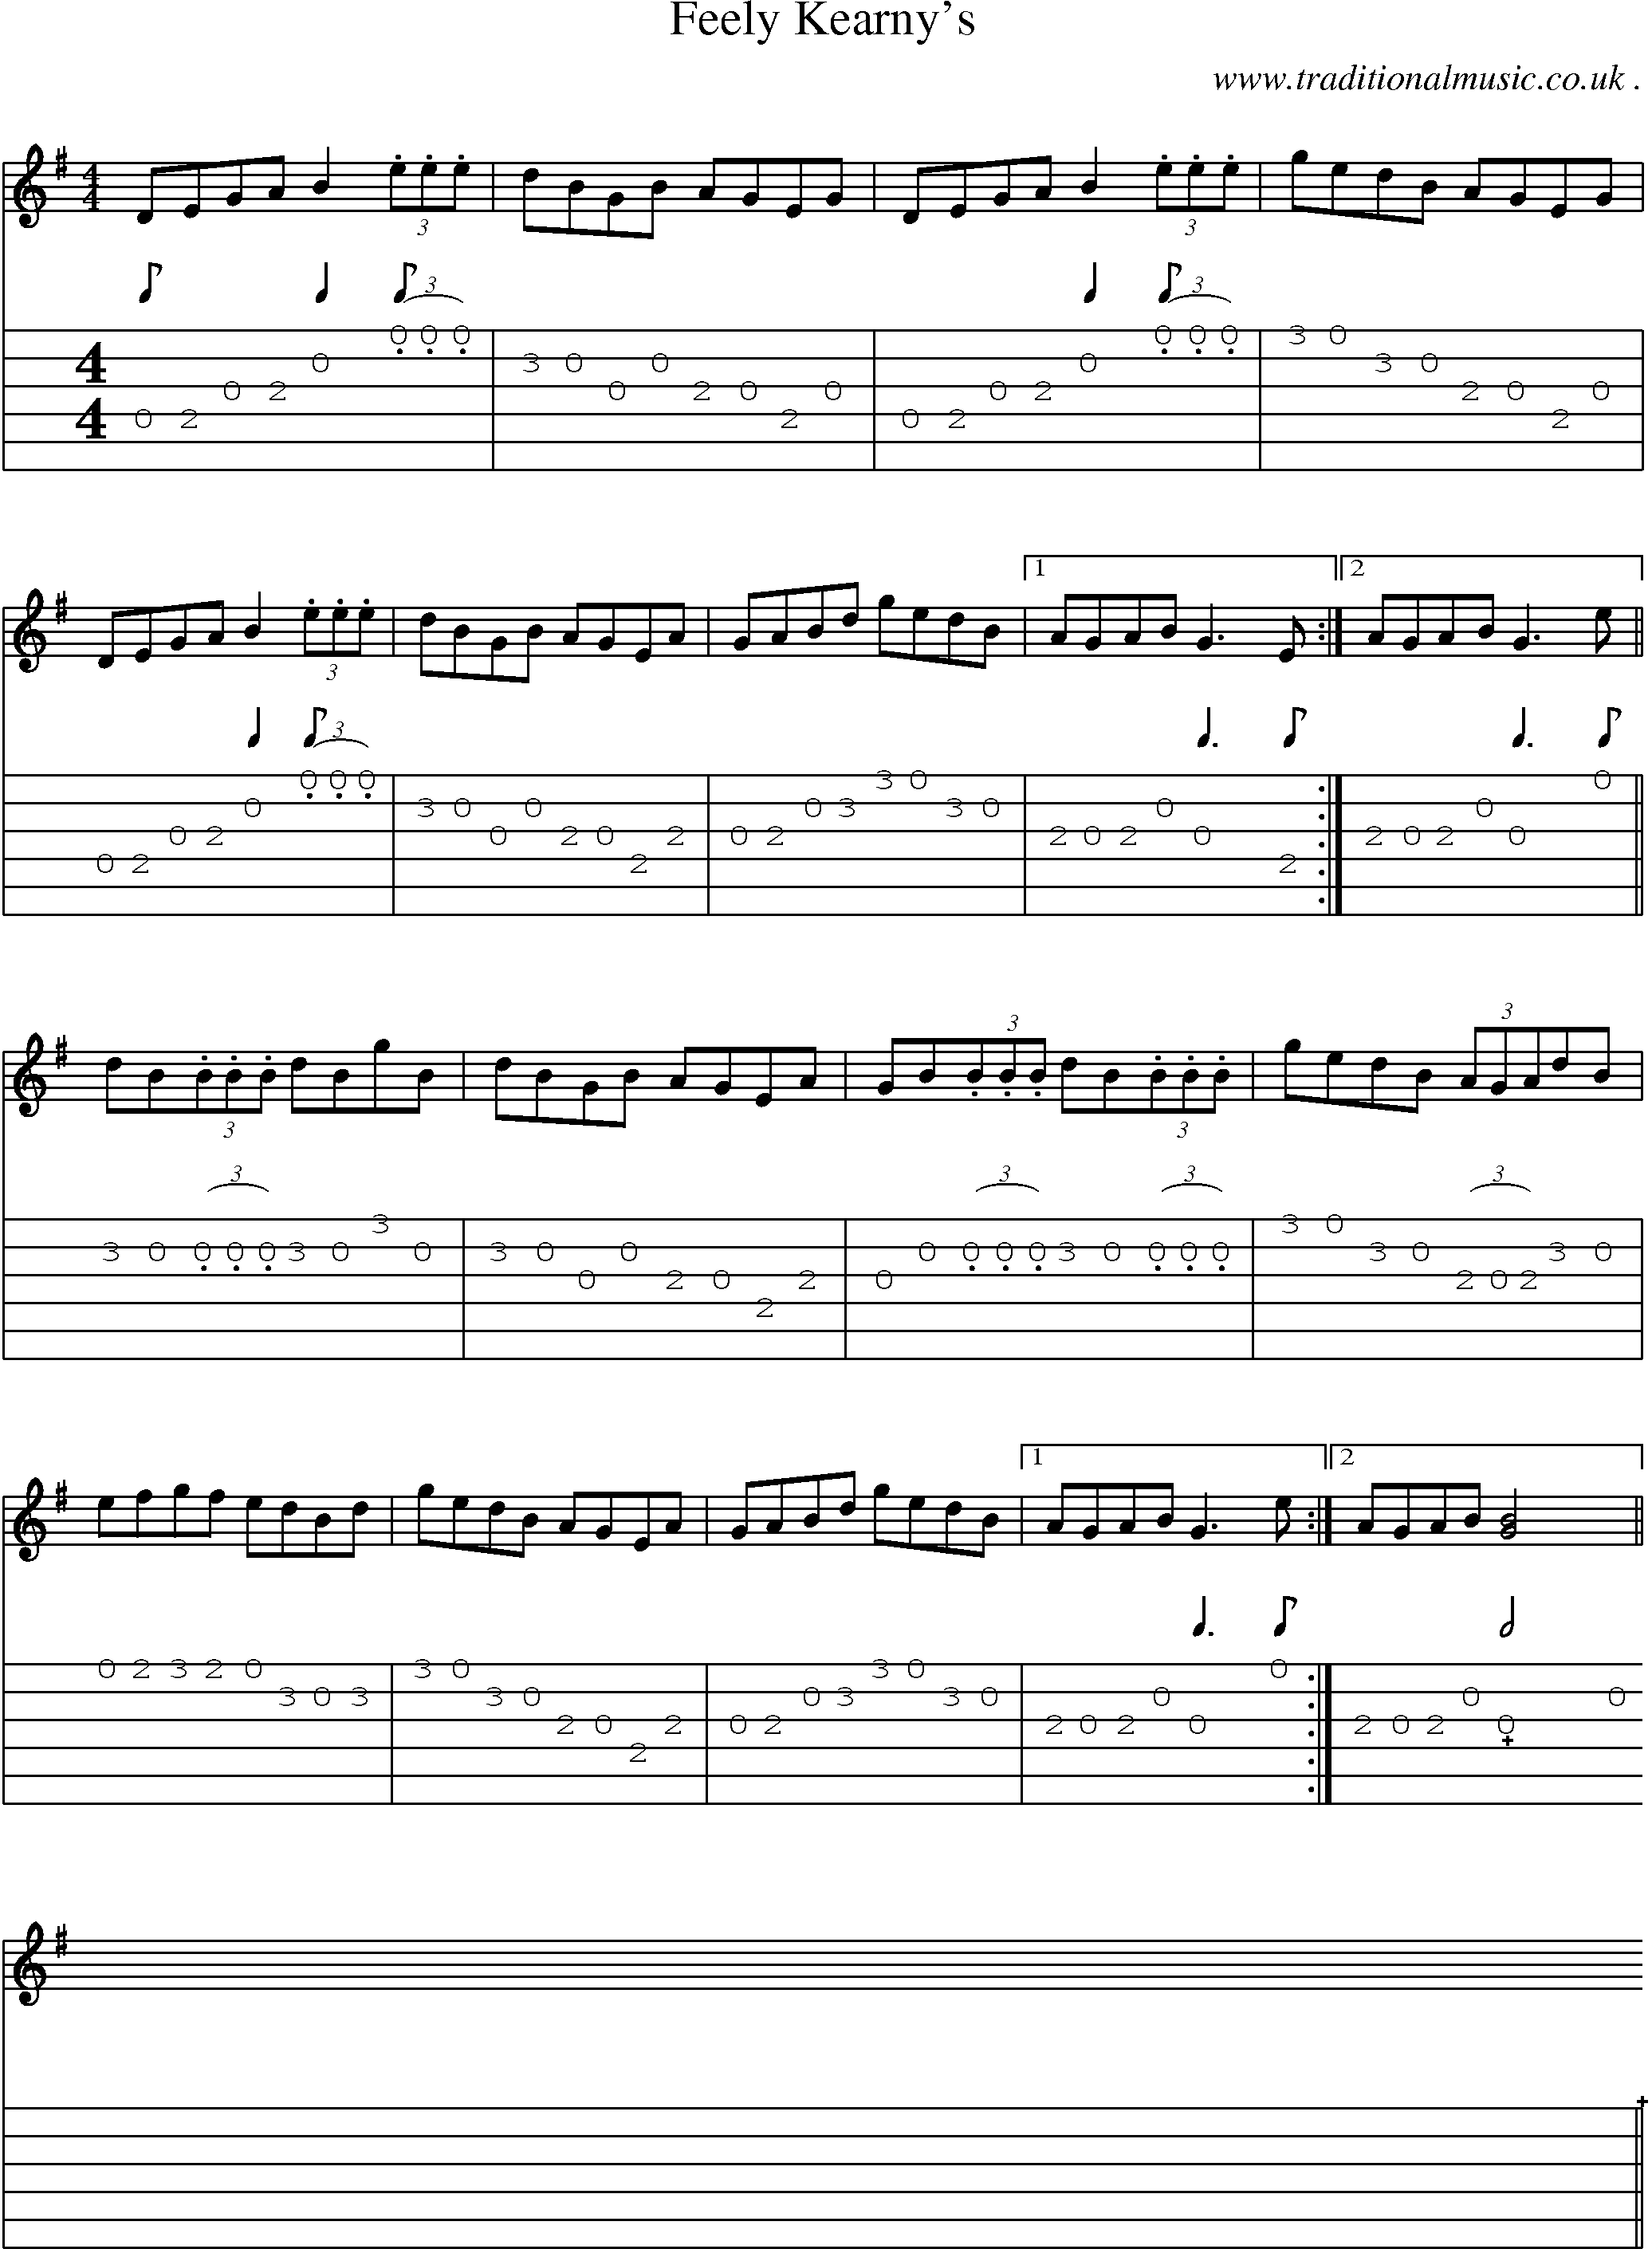 Sheet-Music and Guitar Tabs for Feely Kearnys